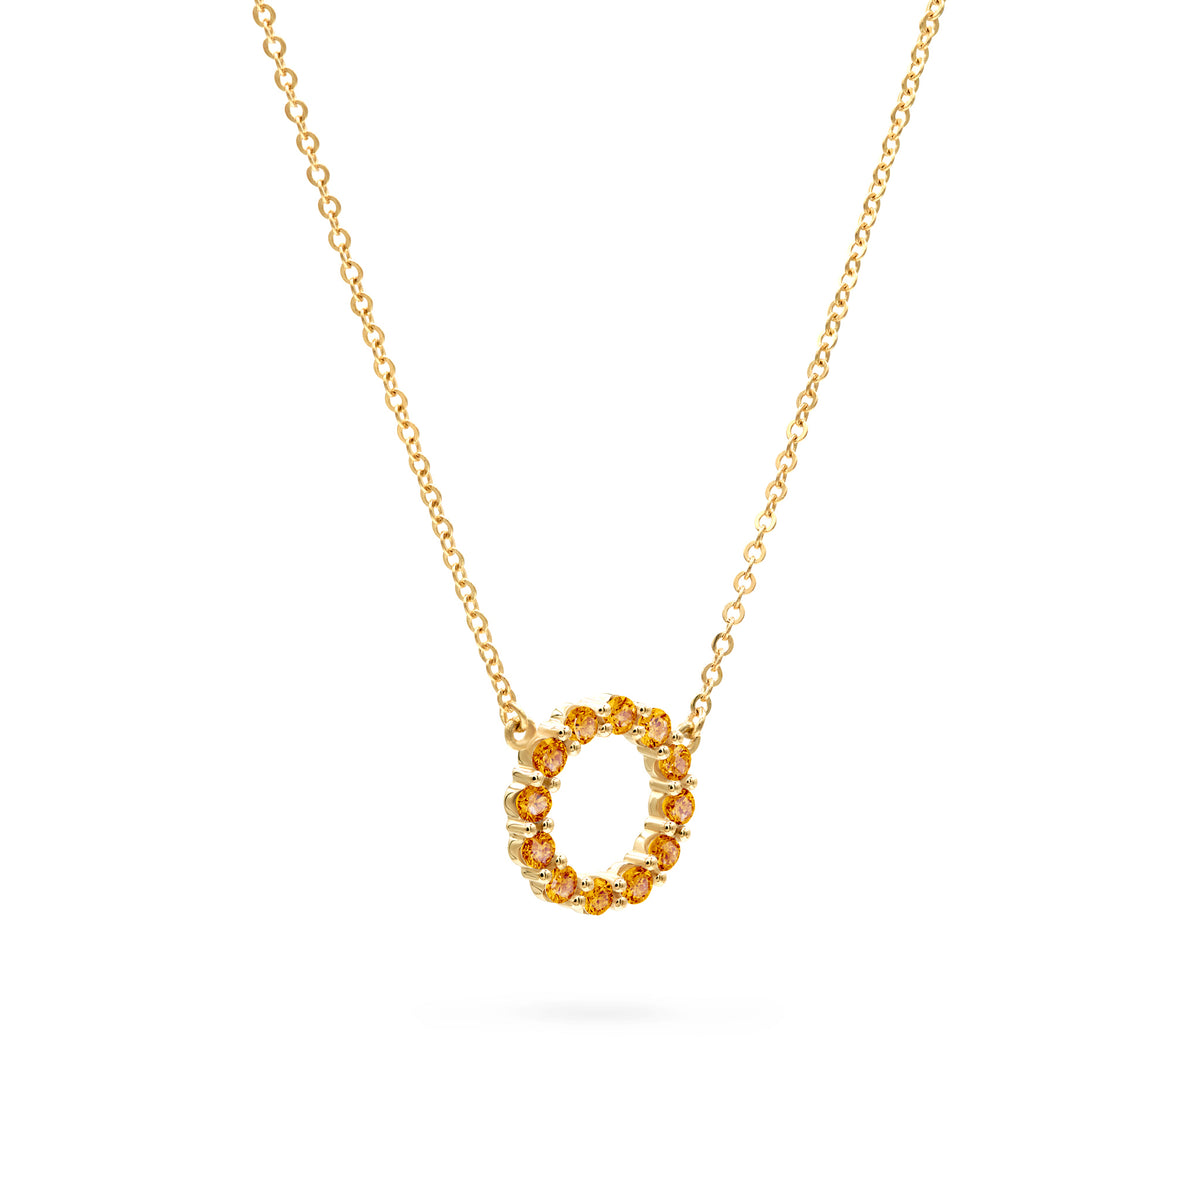 Rosecliff Small Circle Citrine Necklace in 14k Gold (November)